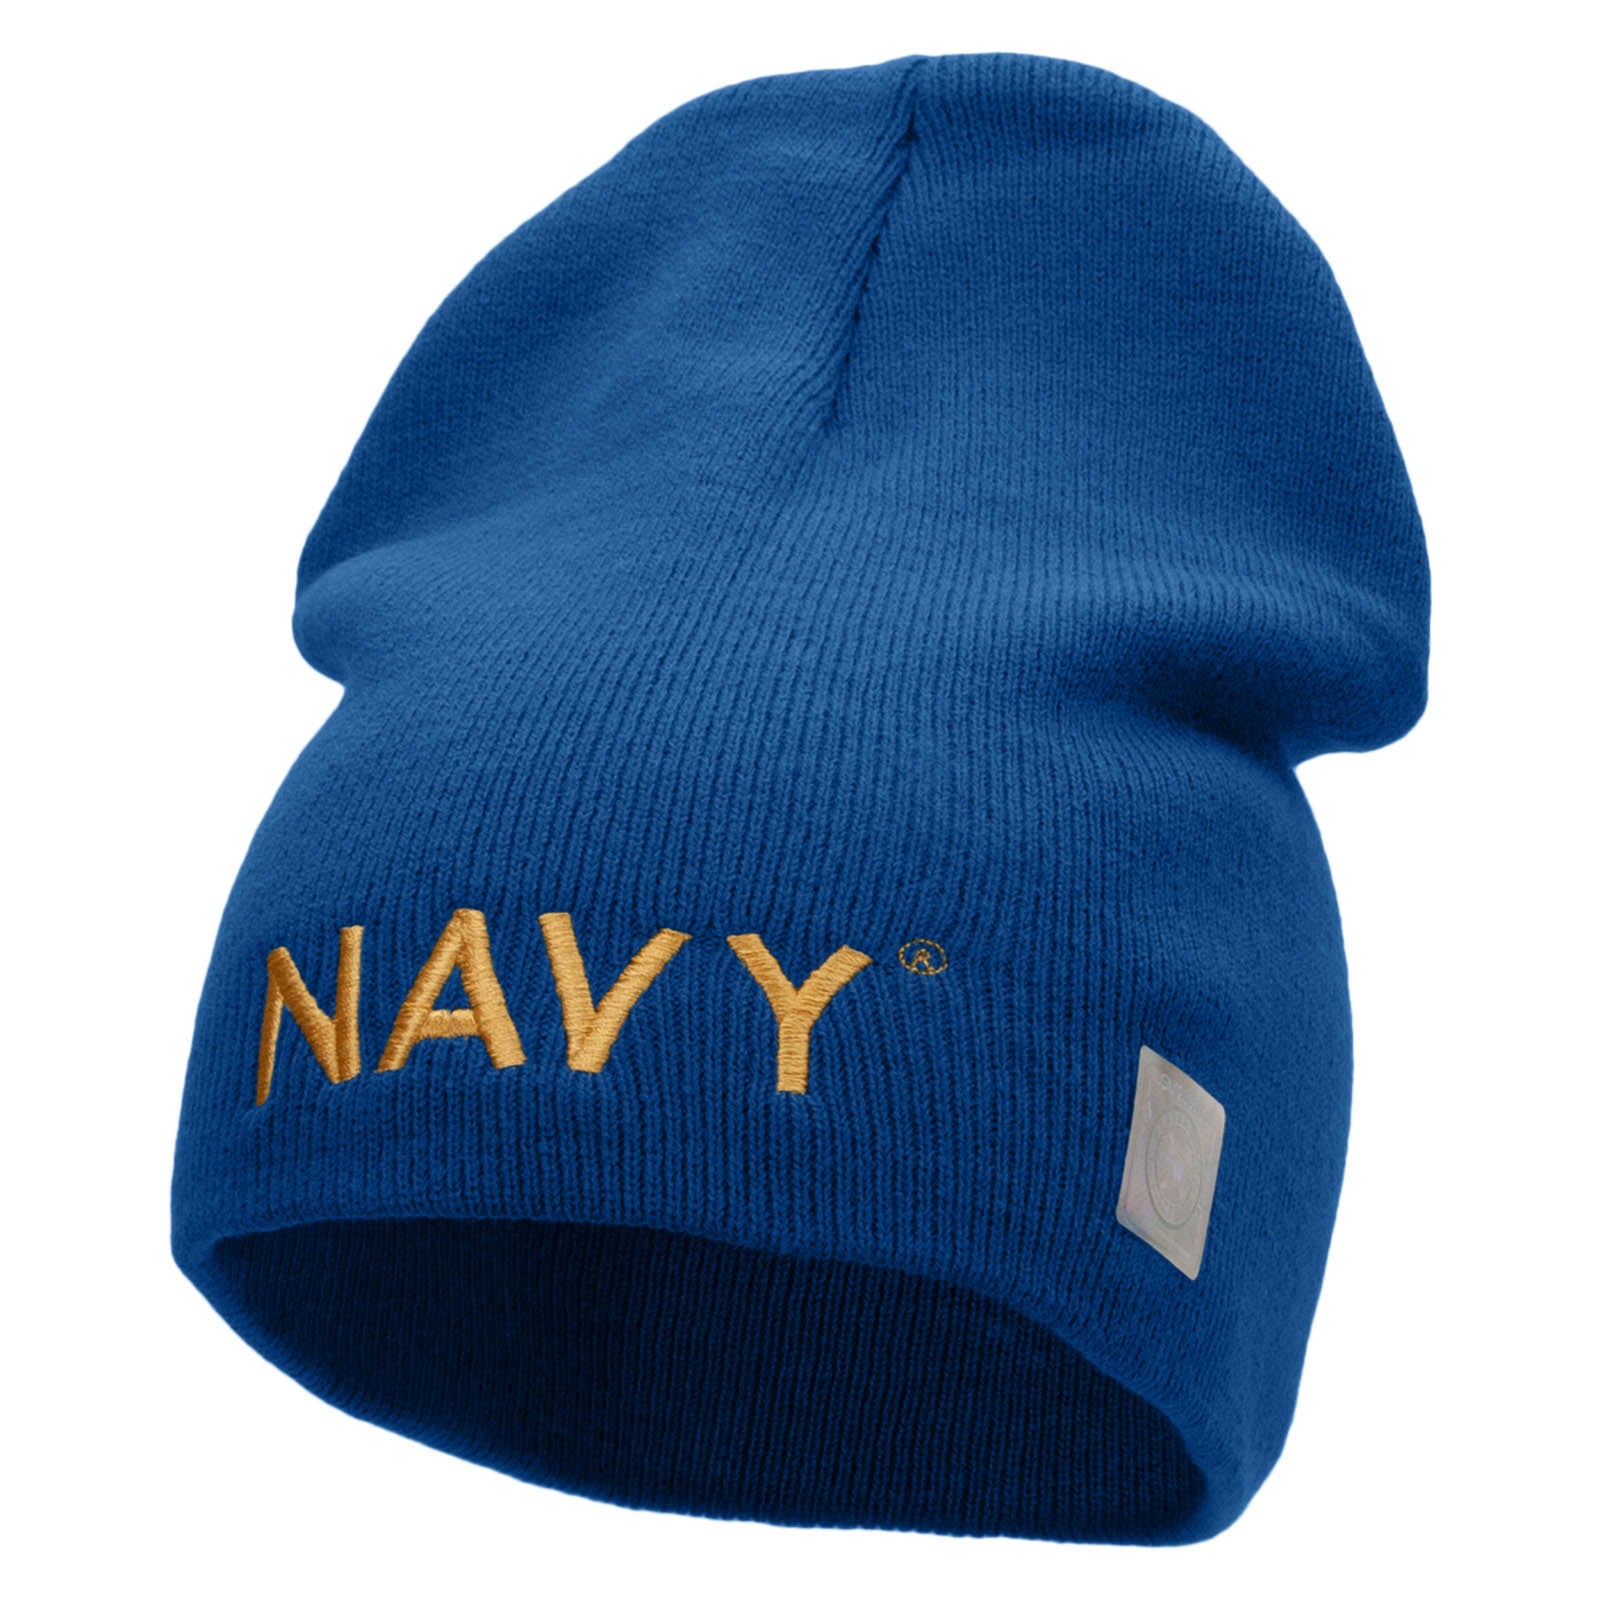 Licensed Navy Military Embroidered Short Beanie Made in USA - Royal Blue OSFM